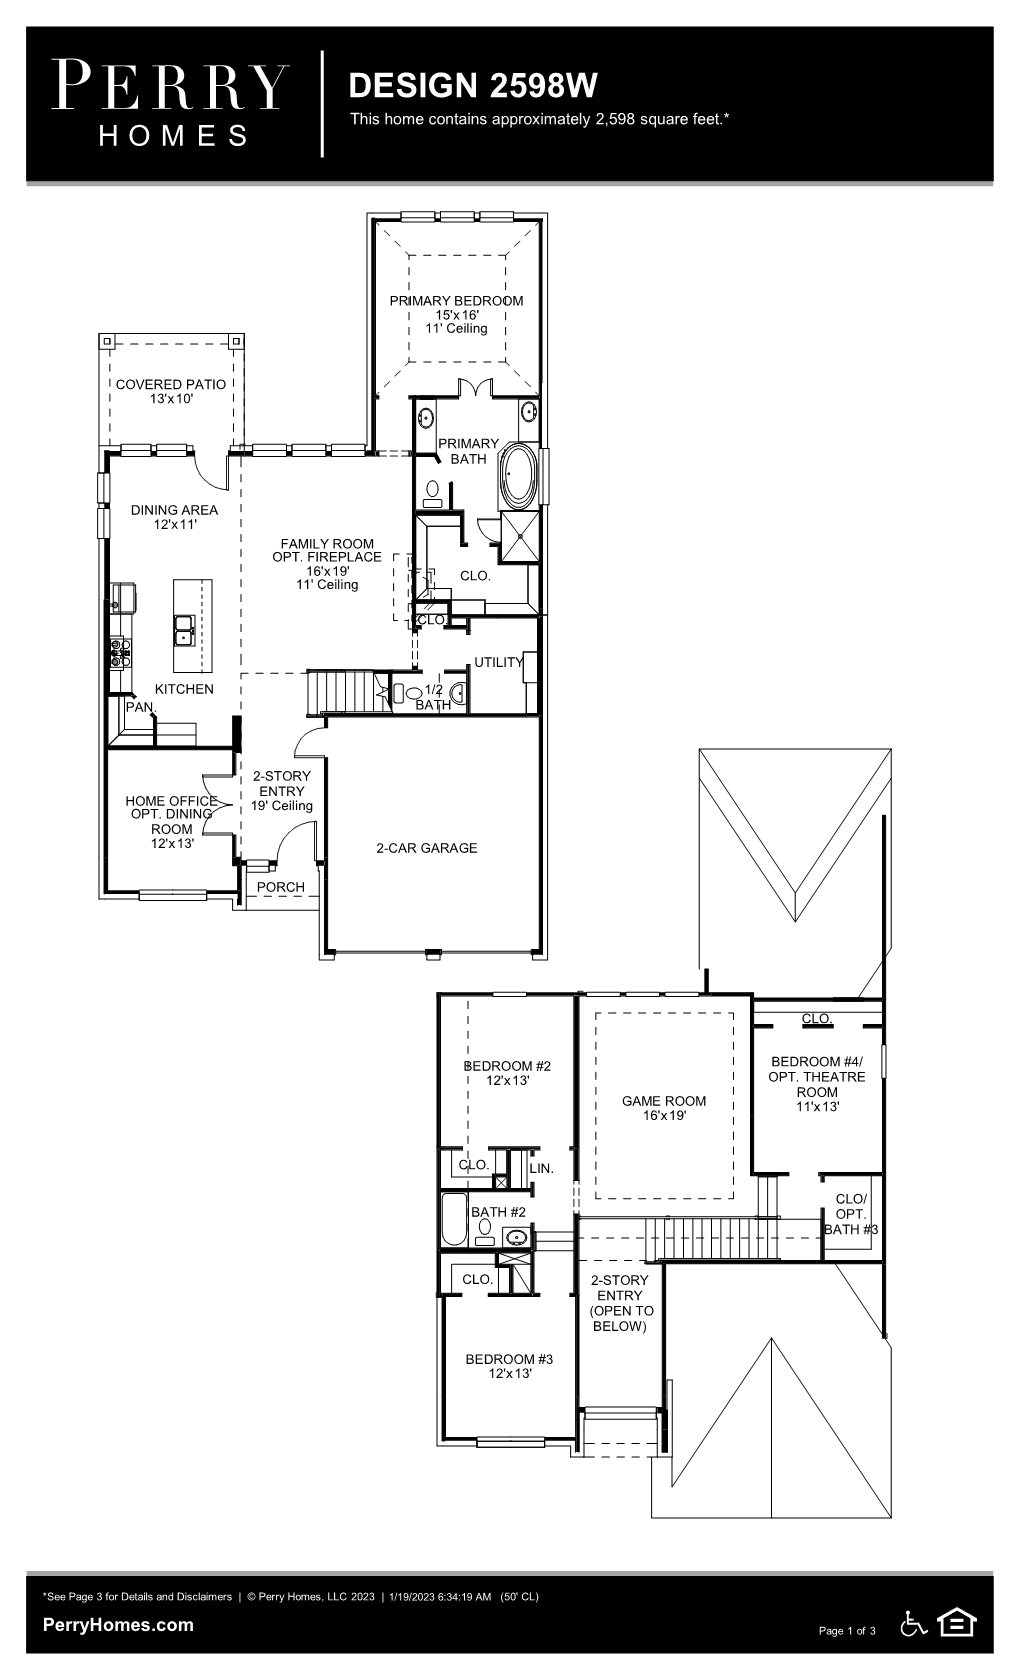 Available to build in Aliana 50' Design 2598W Perry Homes